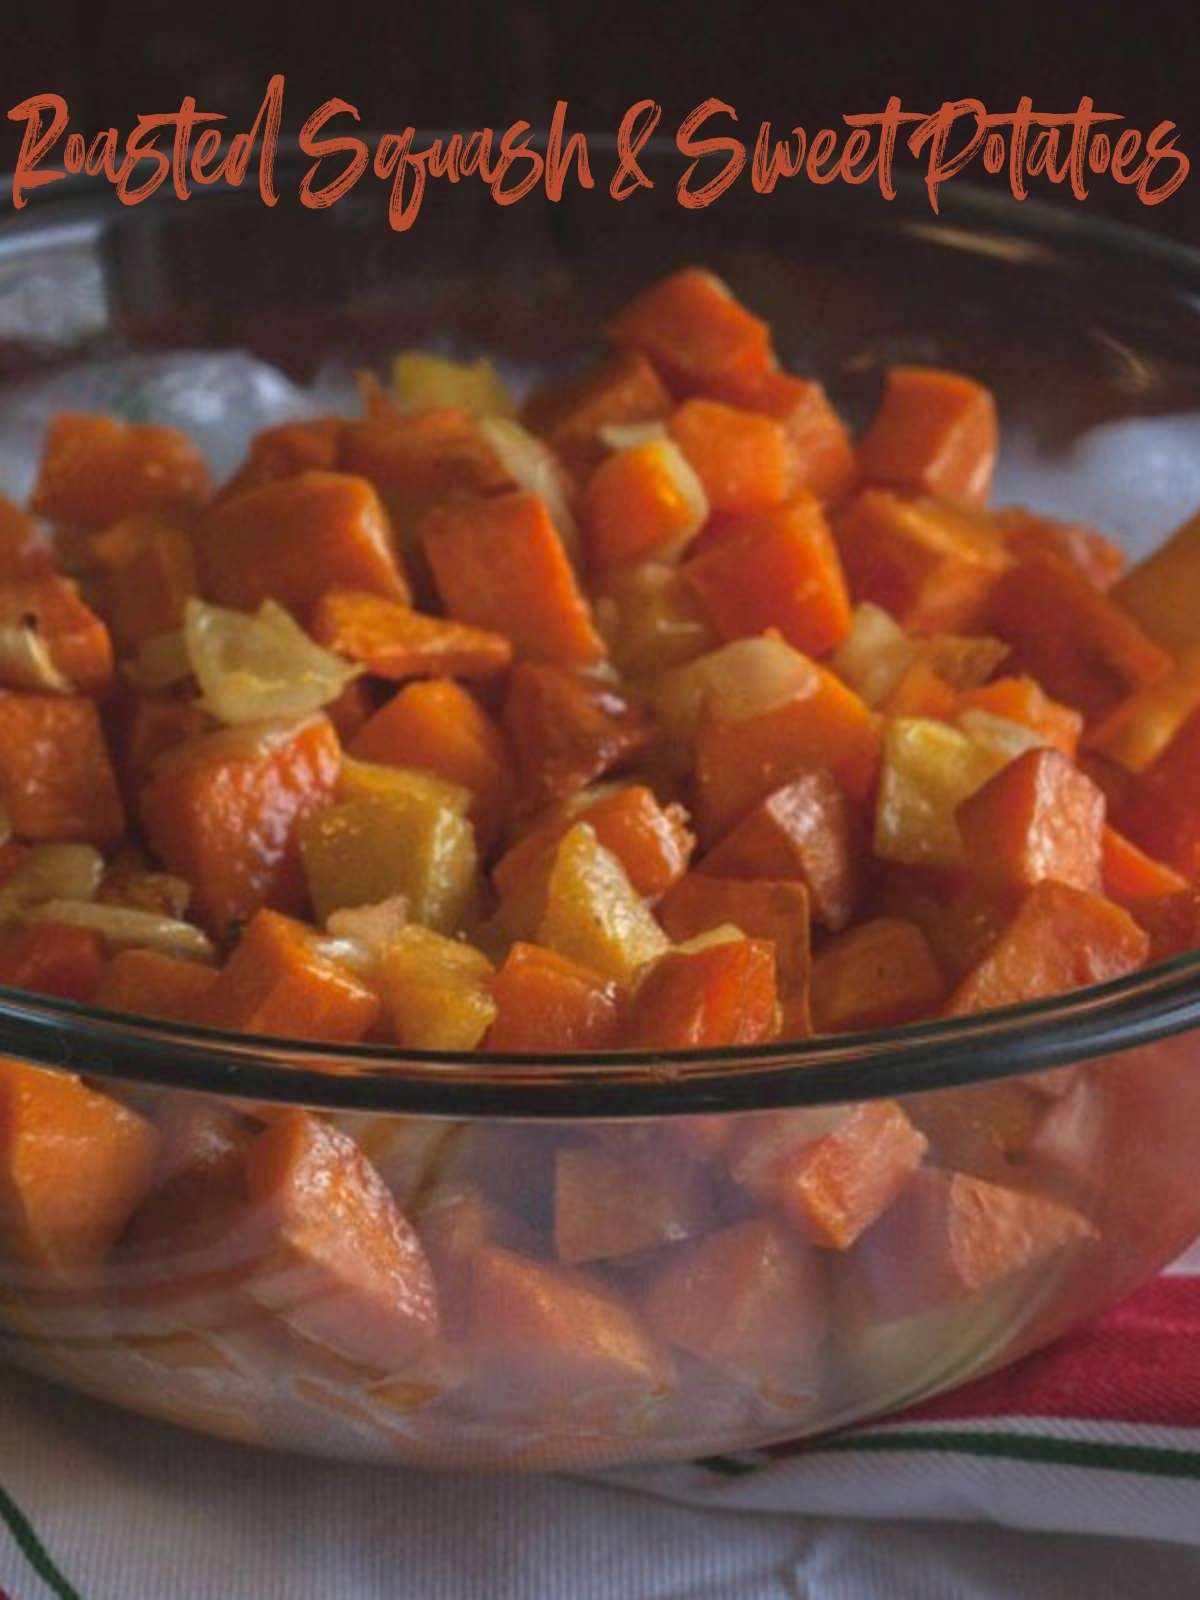 Roasted squash and sweet potatoes in a glass bowl